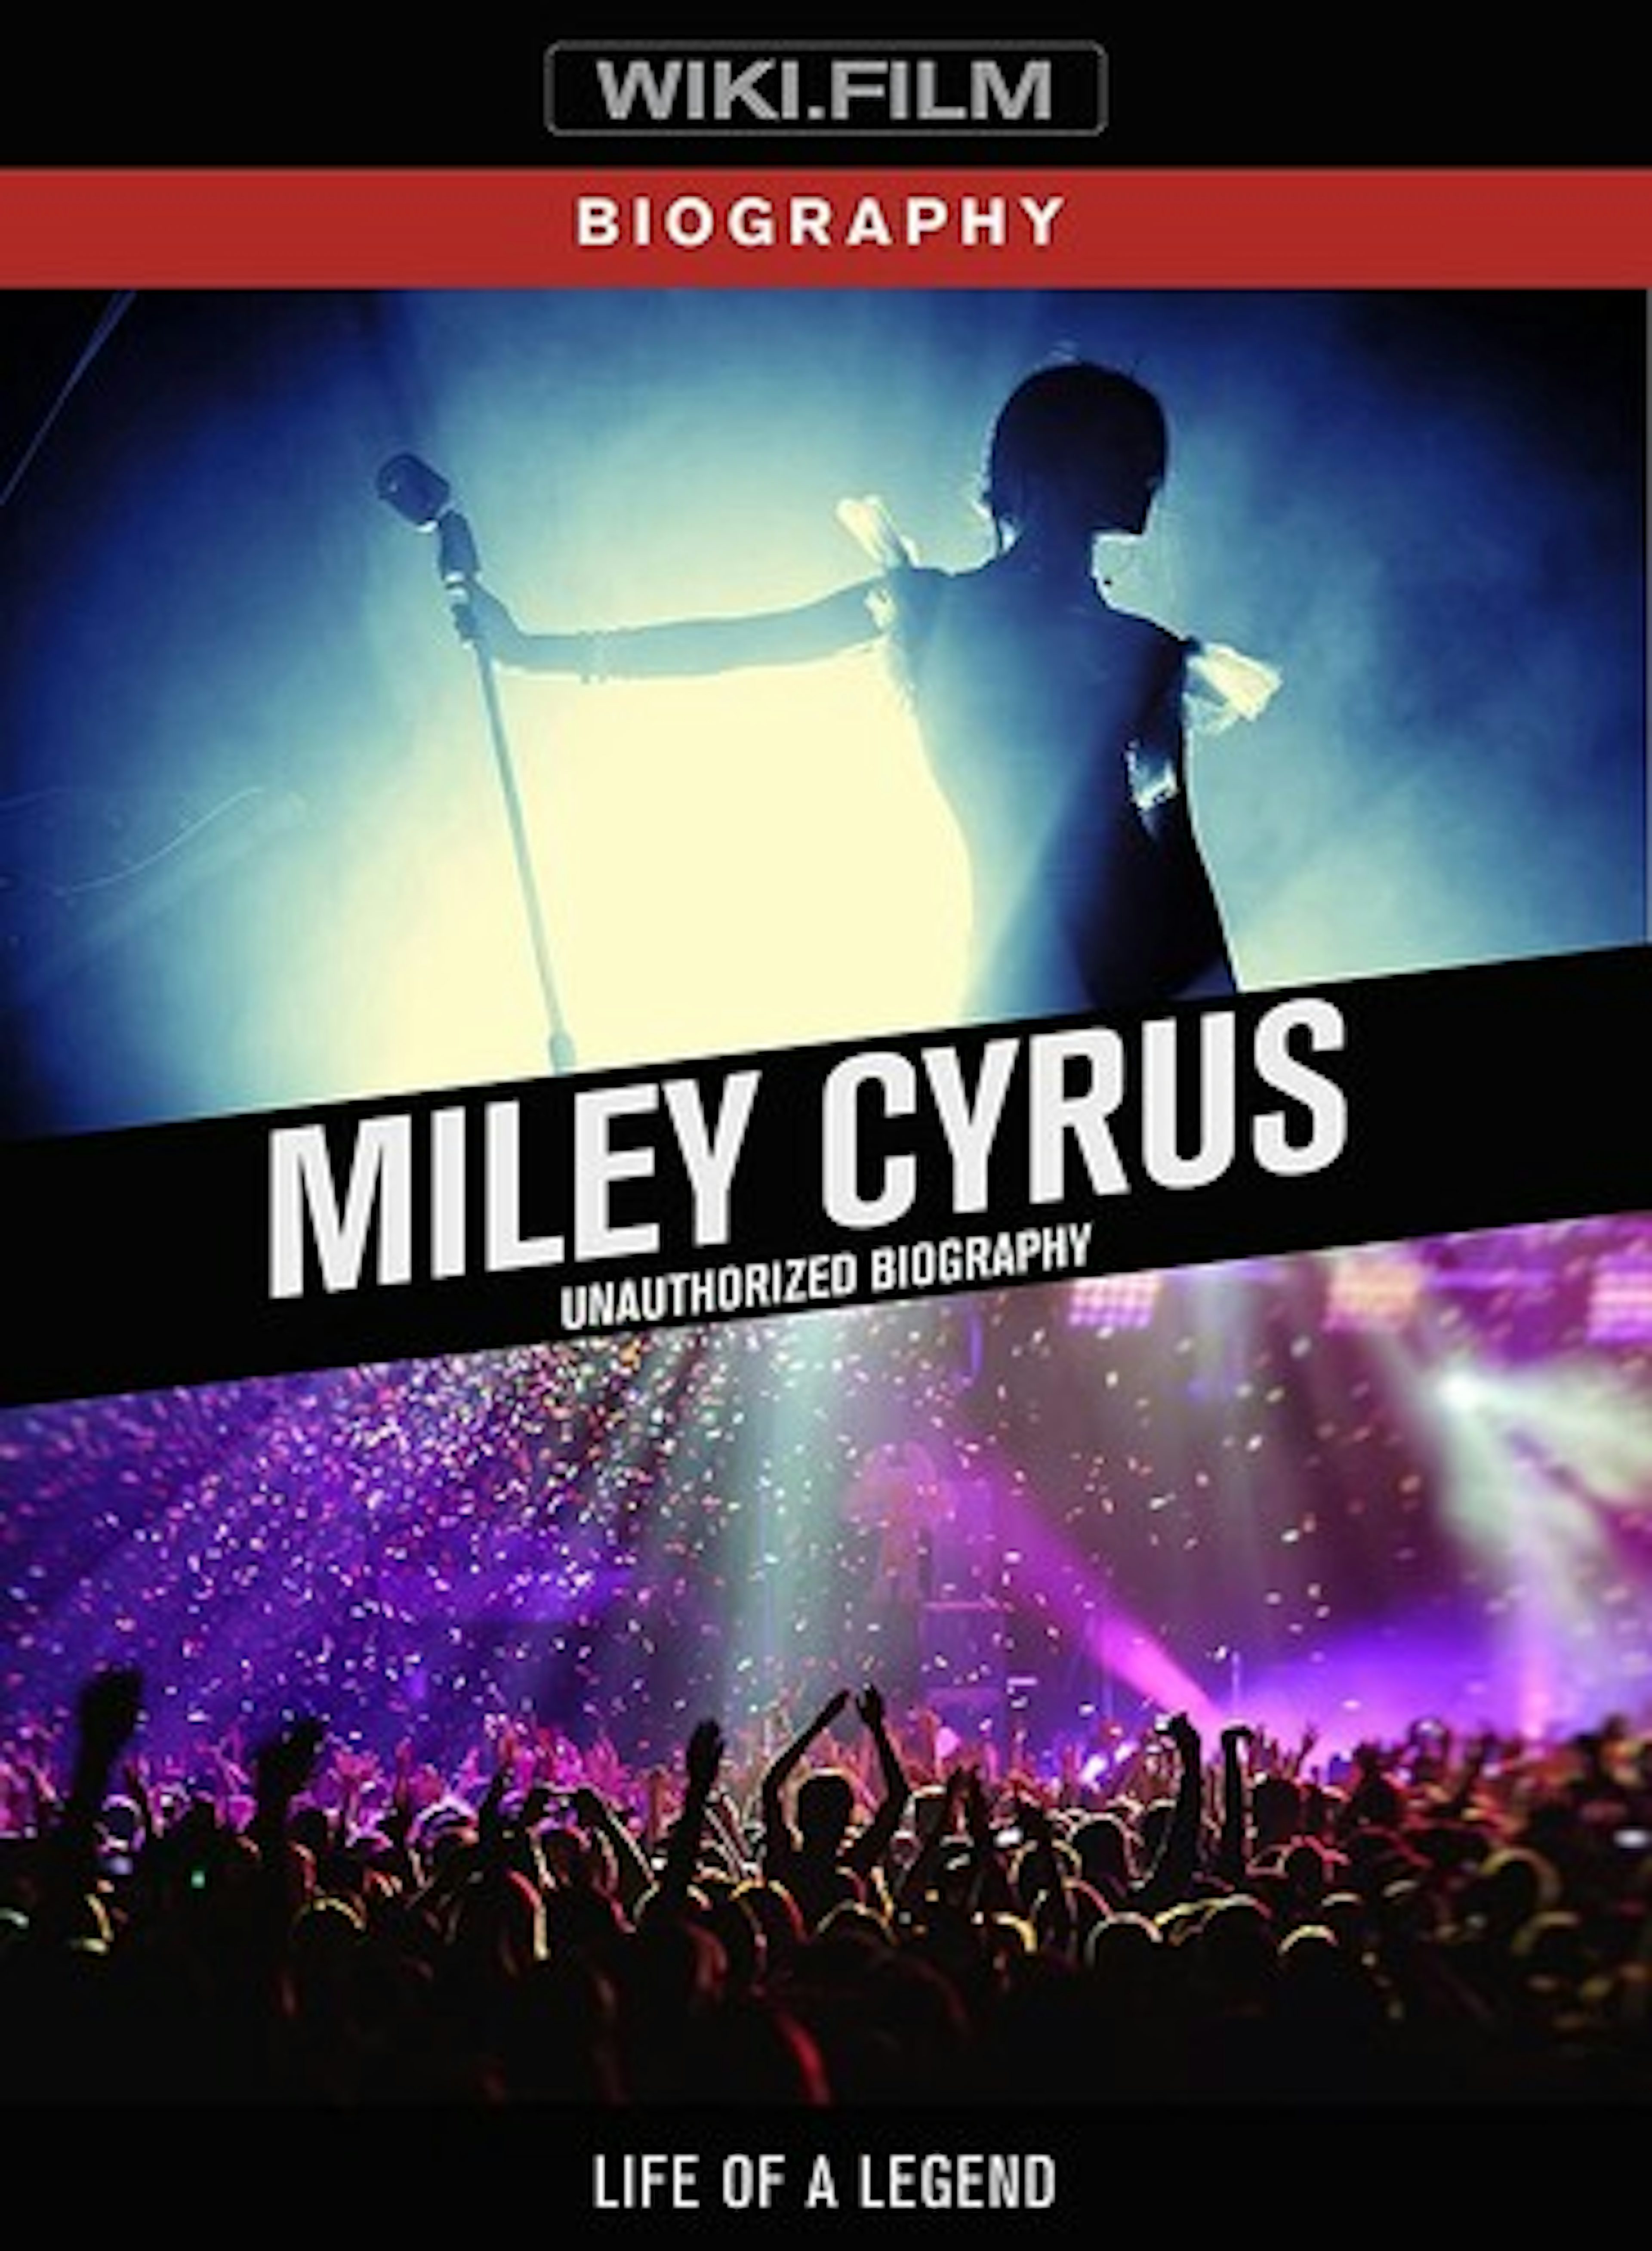 MILEY CYRUS: UNAUTHORIZED BIOGRAPHY DVD